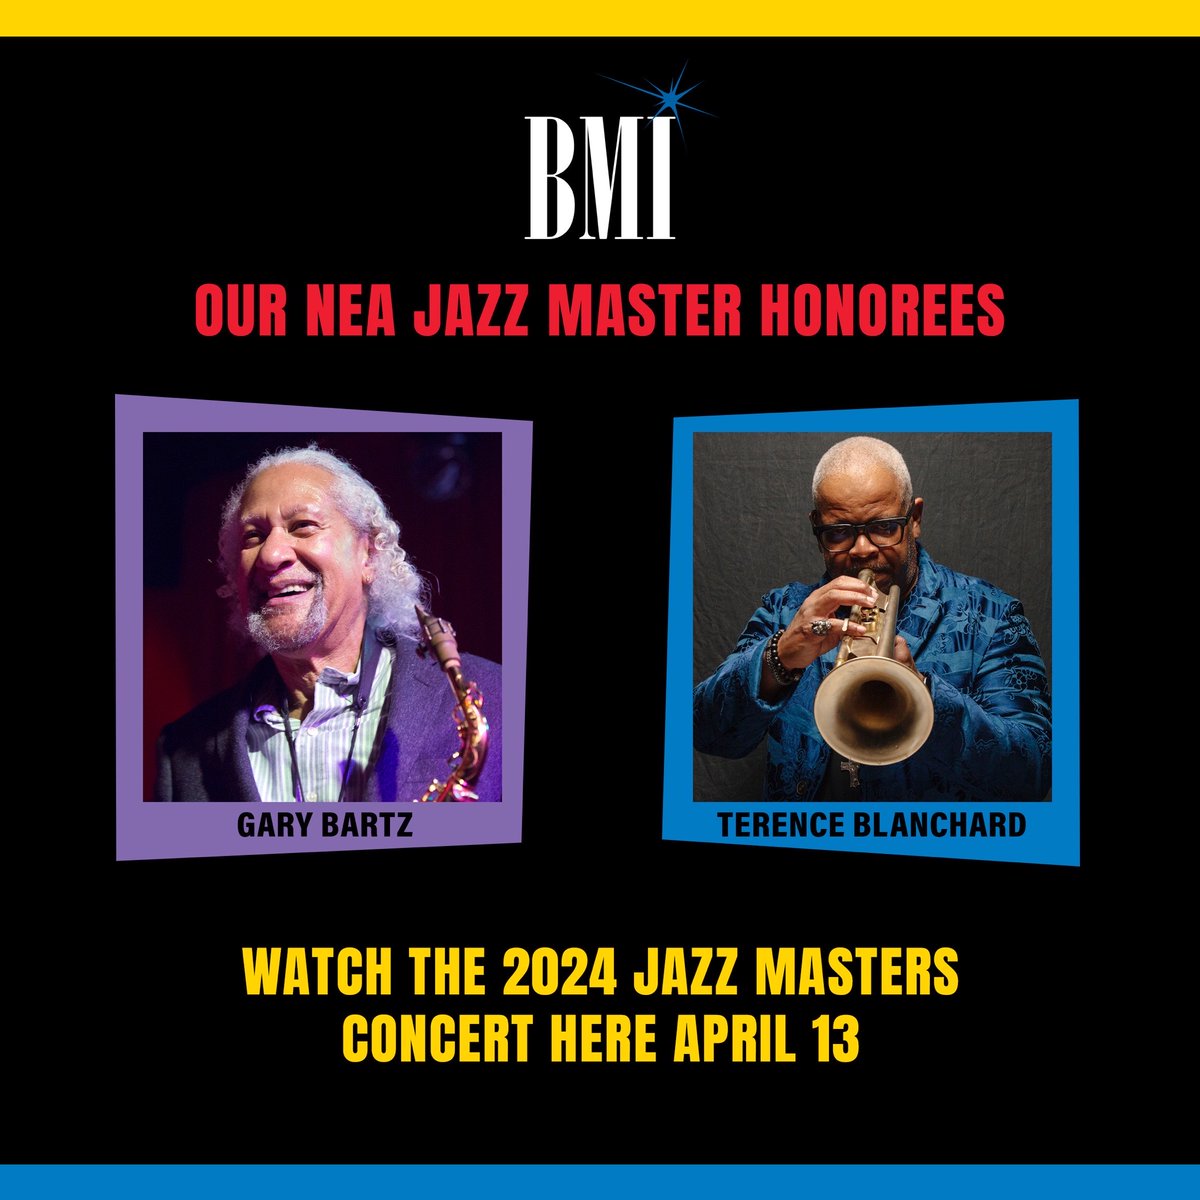 We teamed up with the @NEAarts and @kencen for a special live stream of the 2024 #NEAJazzMasters Tribute Concert Celebrating our #BMIJazz family, @bartz_gary & @T_Blanchard, and on Saturday, April 13th at 7:30 p.m. ET! To watch the livestream, click here: bit.ly/3TZcKIk